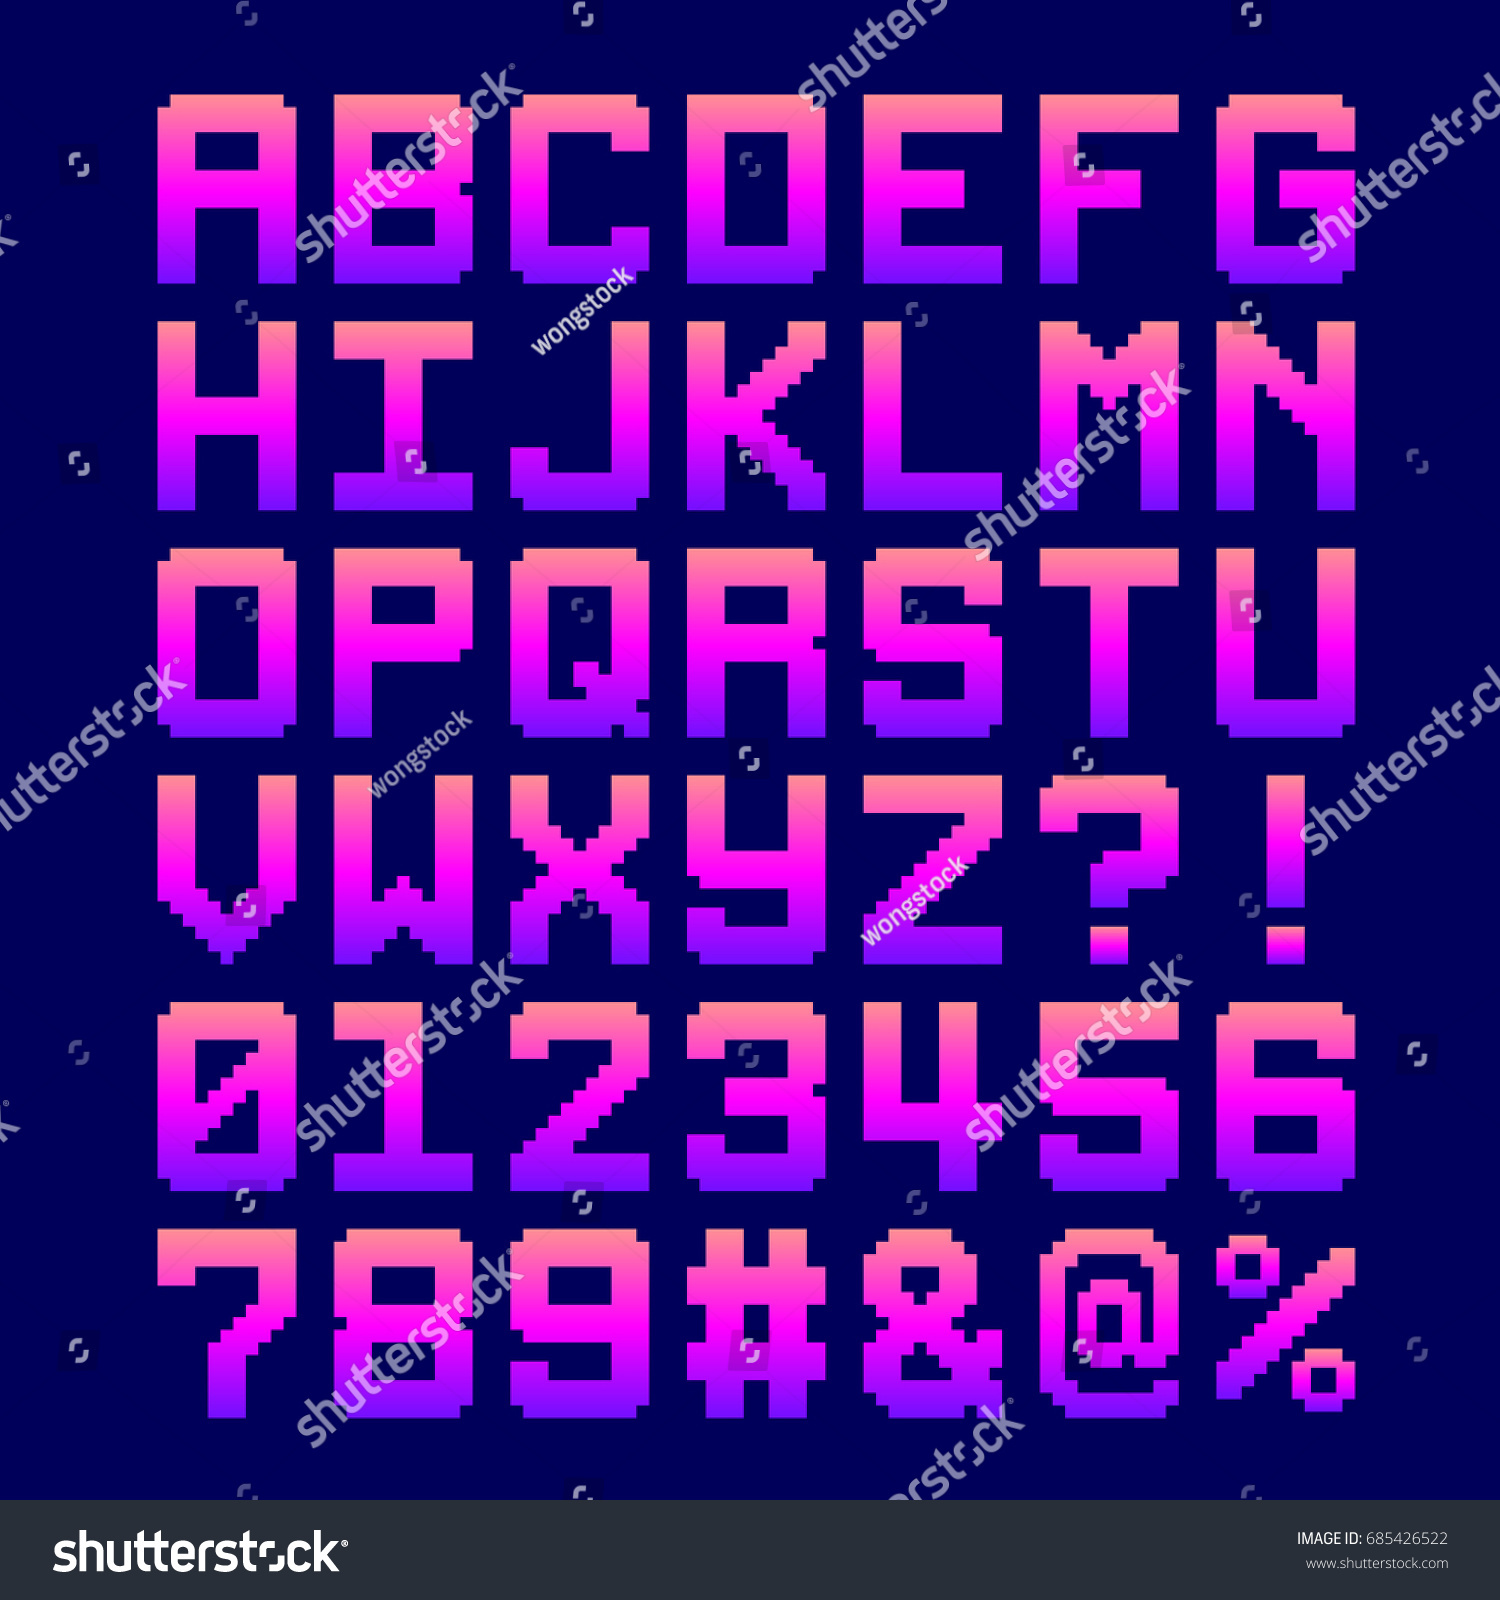 8-Bit Pixel Font - Letter and Numbers in a Pink Gradient. EPS8 Vector #685426522